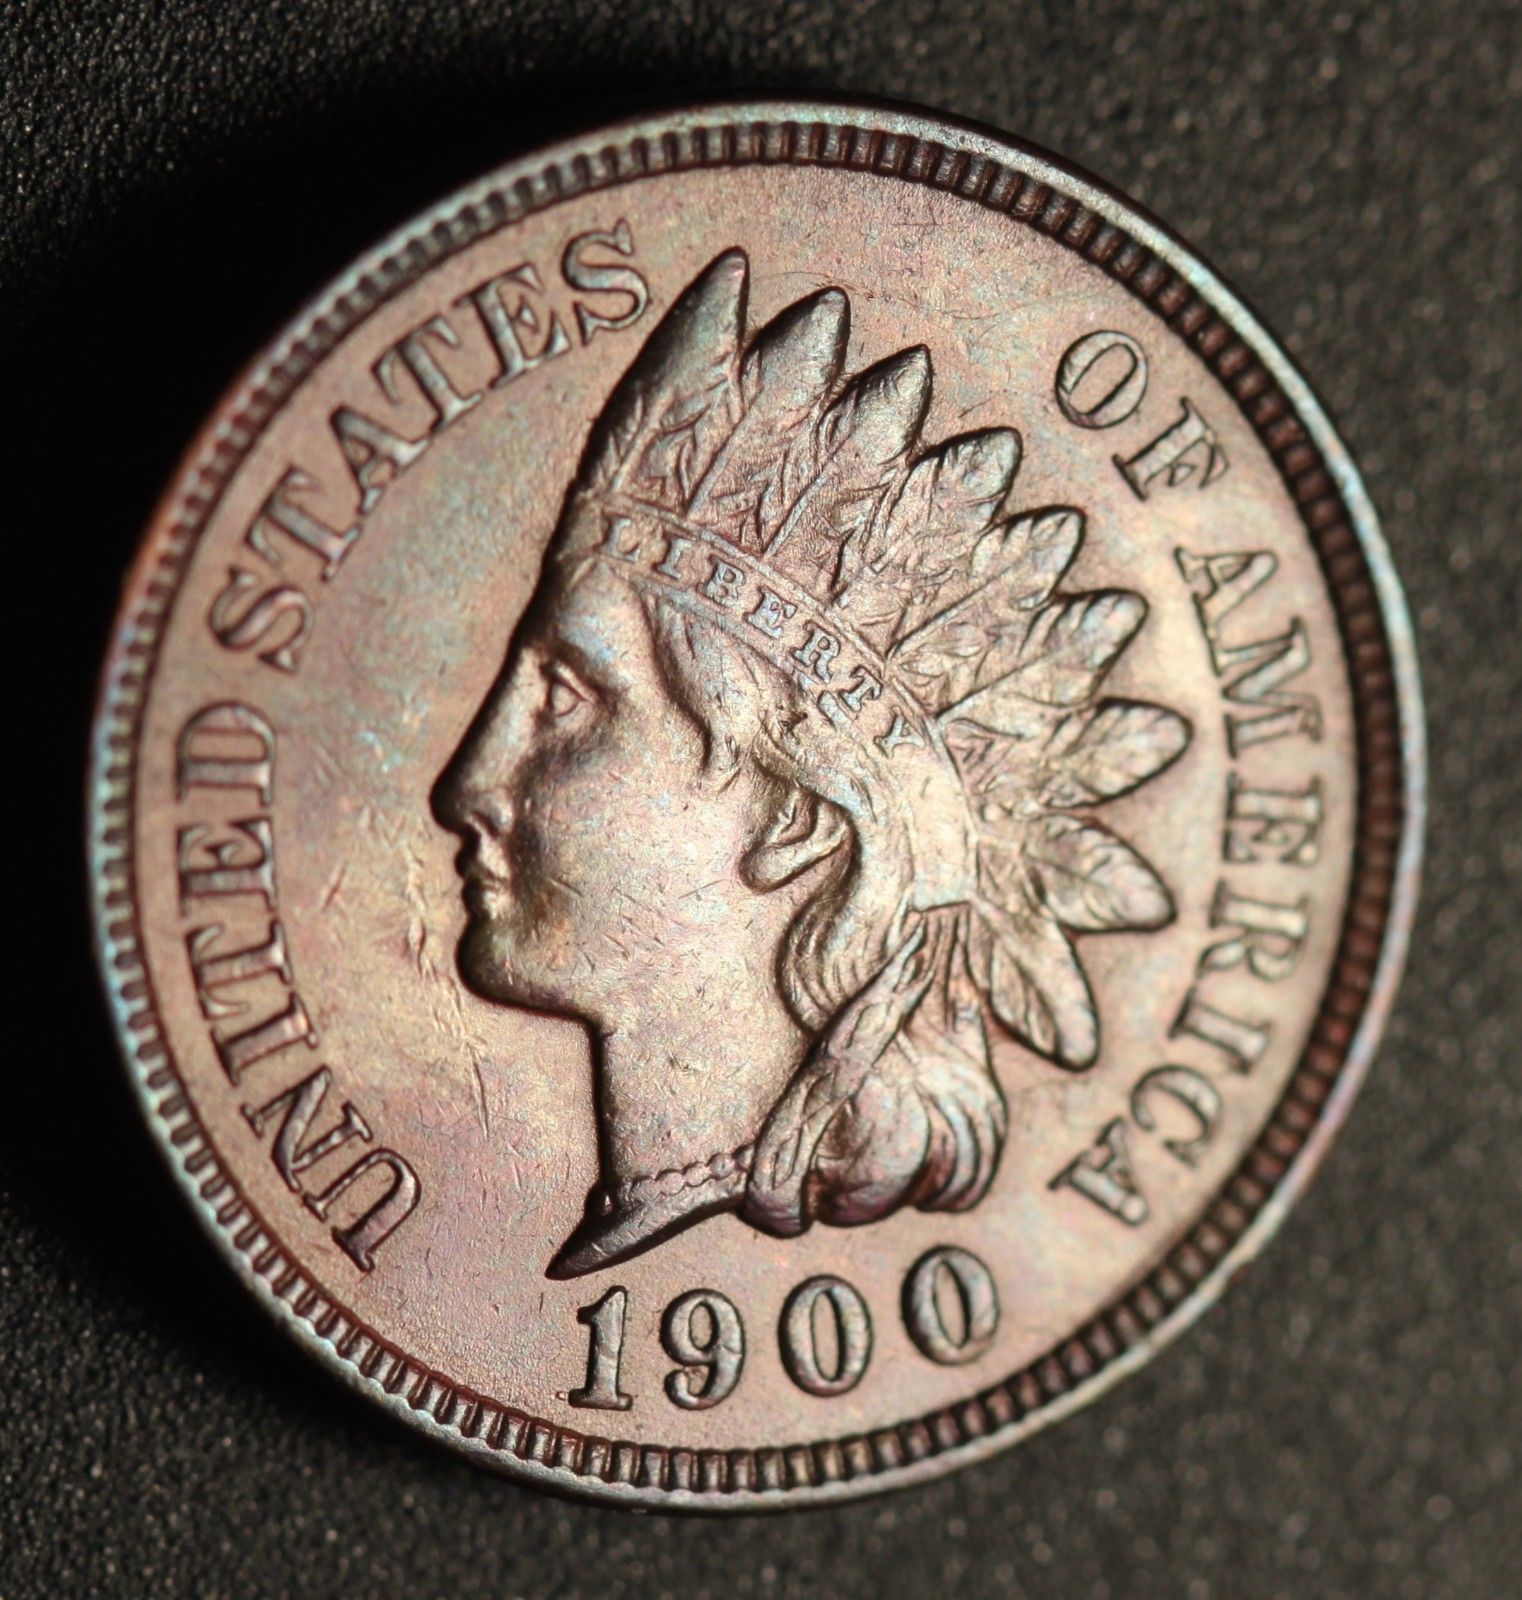 1900 RPD-019 - Indian Head Penny - Photo by Ed Nathanson